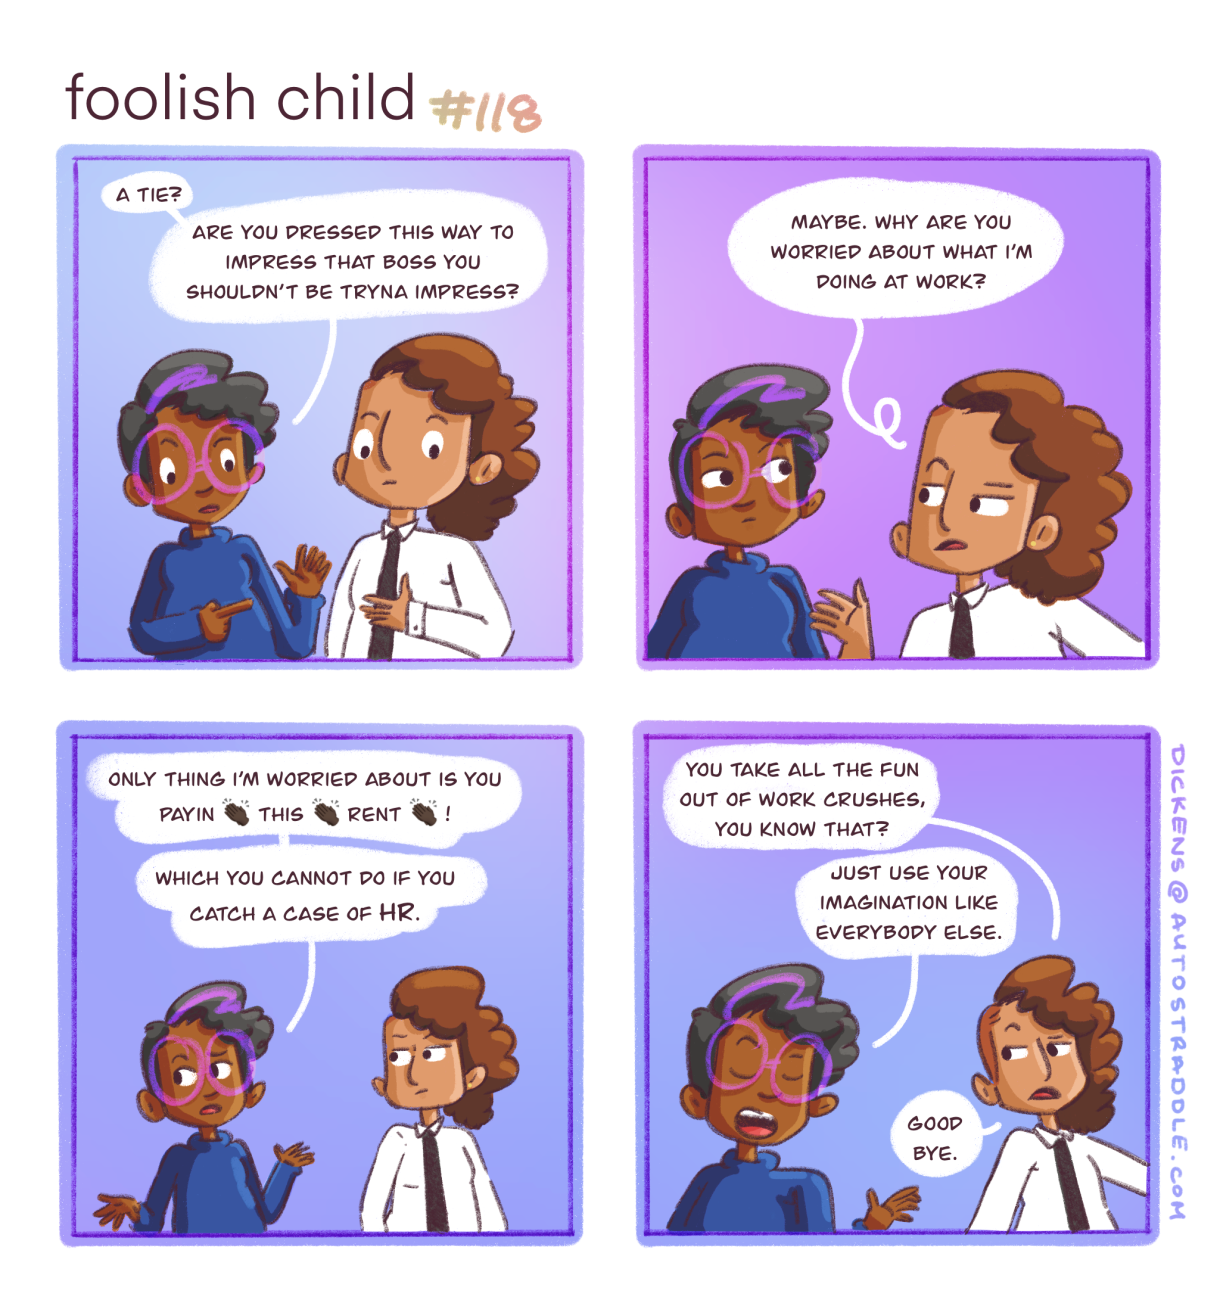 In a four panel comic with purple and blue background, Dickens clocks Sarai in a white button down and black tie. Dickens asks Sarai if they are dressing up for their new boss (whom they have a crush on) and Sarai says, "why are you worried bout what I'm doing at work?" Dickens responds, "The only thing I'm worried about is YOU PAYIN' THIS RENT! Which you cannot do if you catch a case from HR." Sarai huffs, "You take all the fun out of work crushes, you know that?" and Dickens responds, "Just use your imagination like the rest of us."